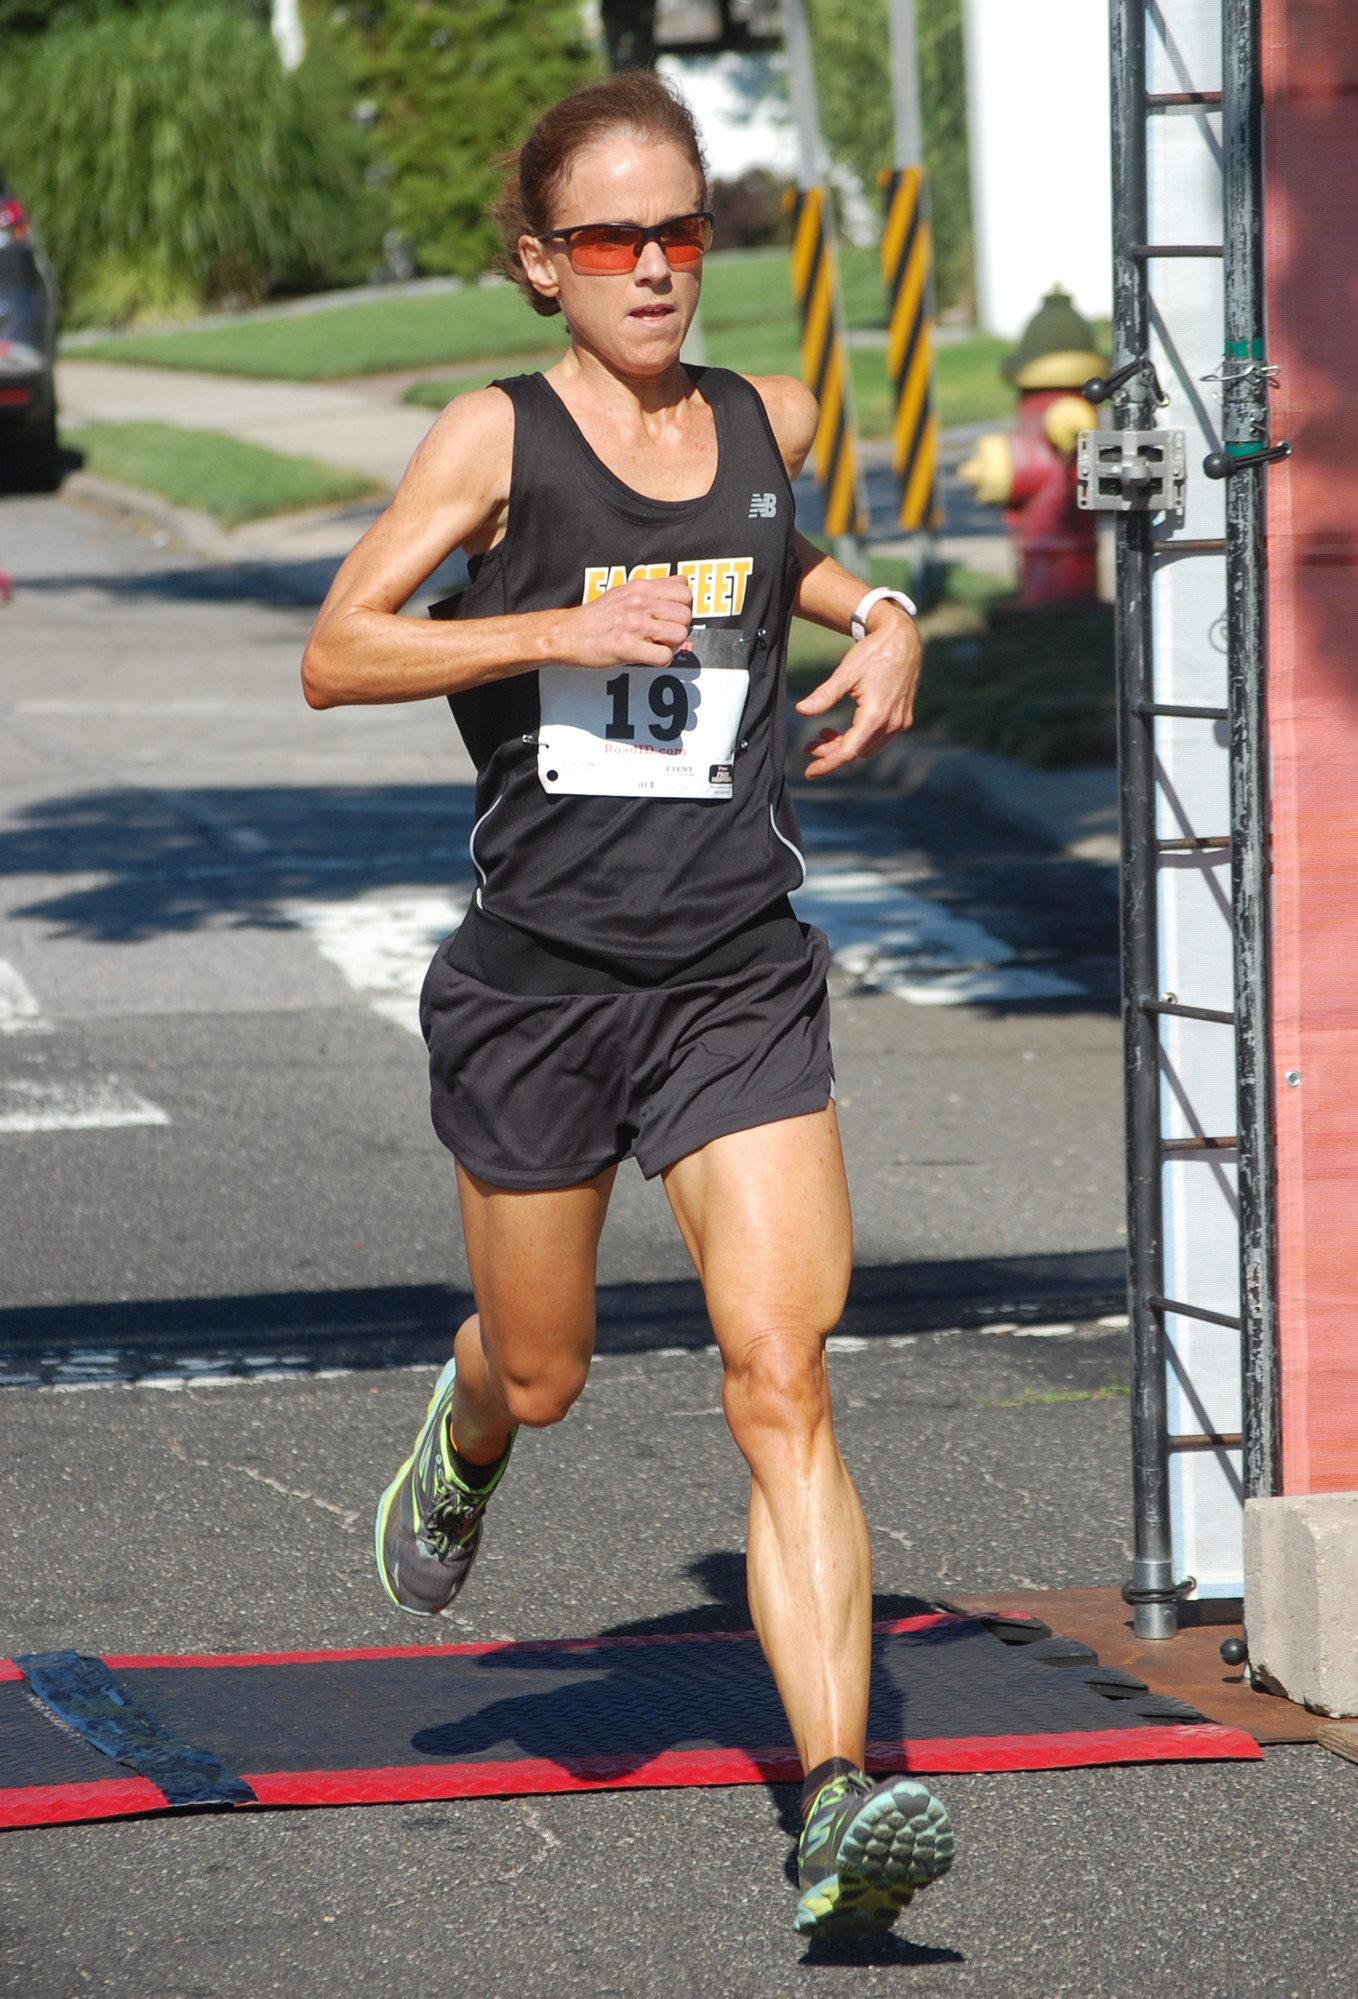 Una Broderick finished third among women and first among Wantagh residents.